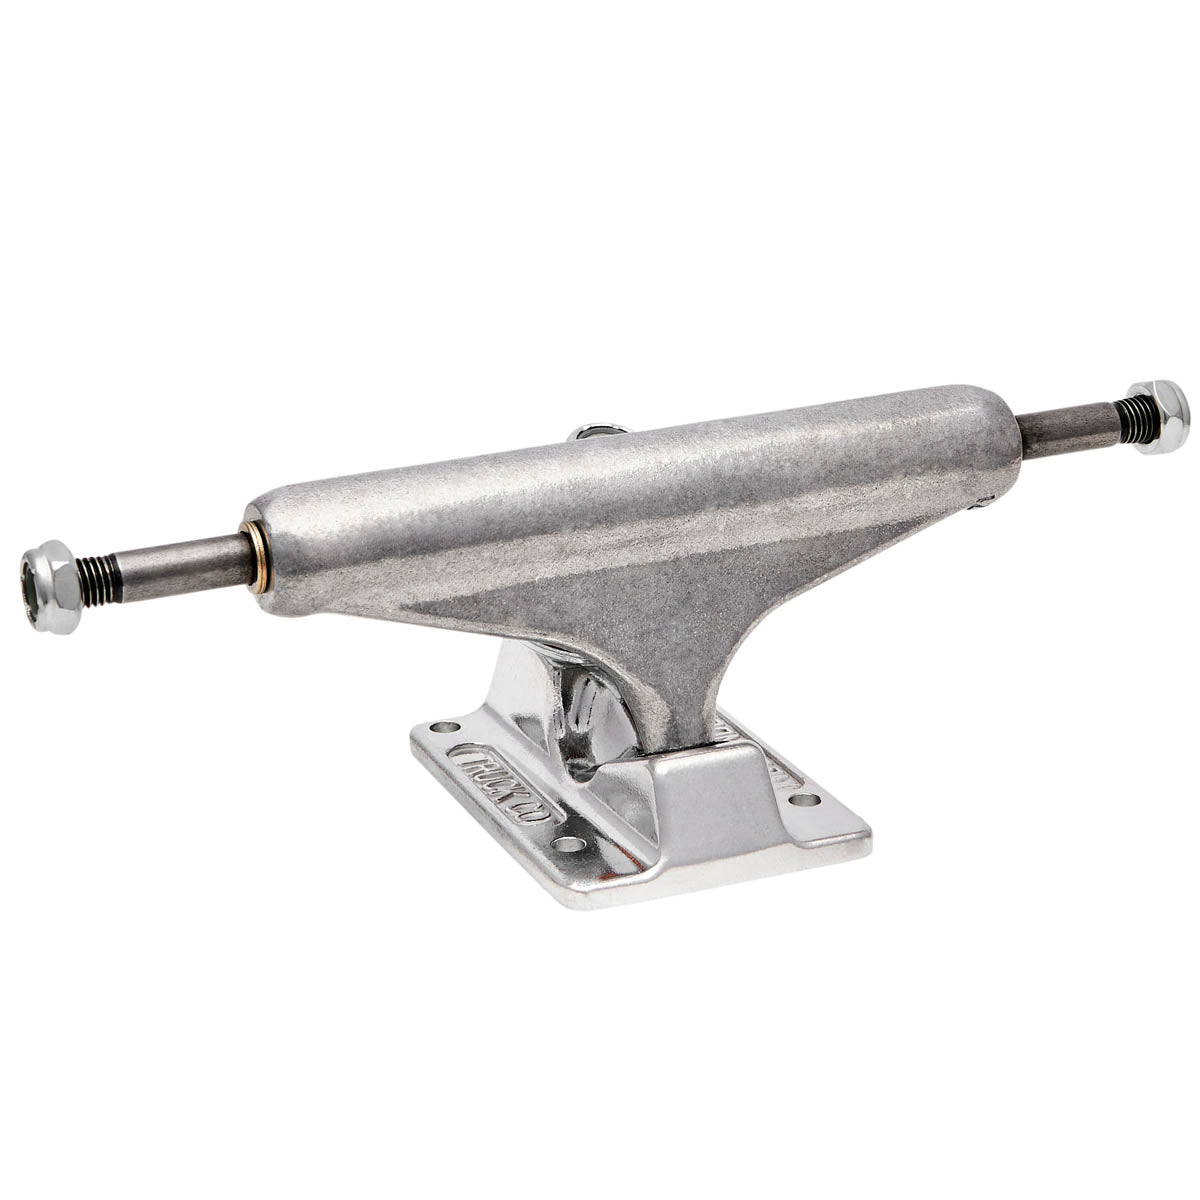 Independent Stage 11 Forged Hollow Skateboard Trucks - Silver image 1